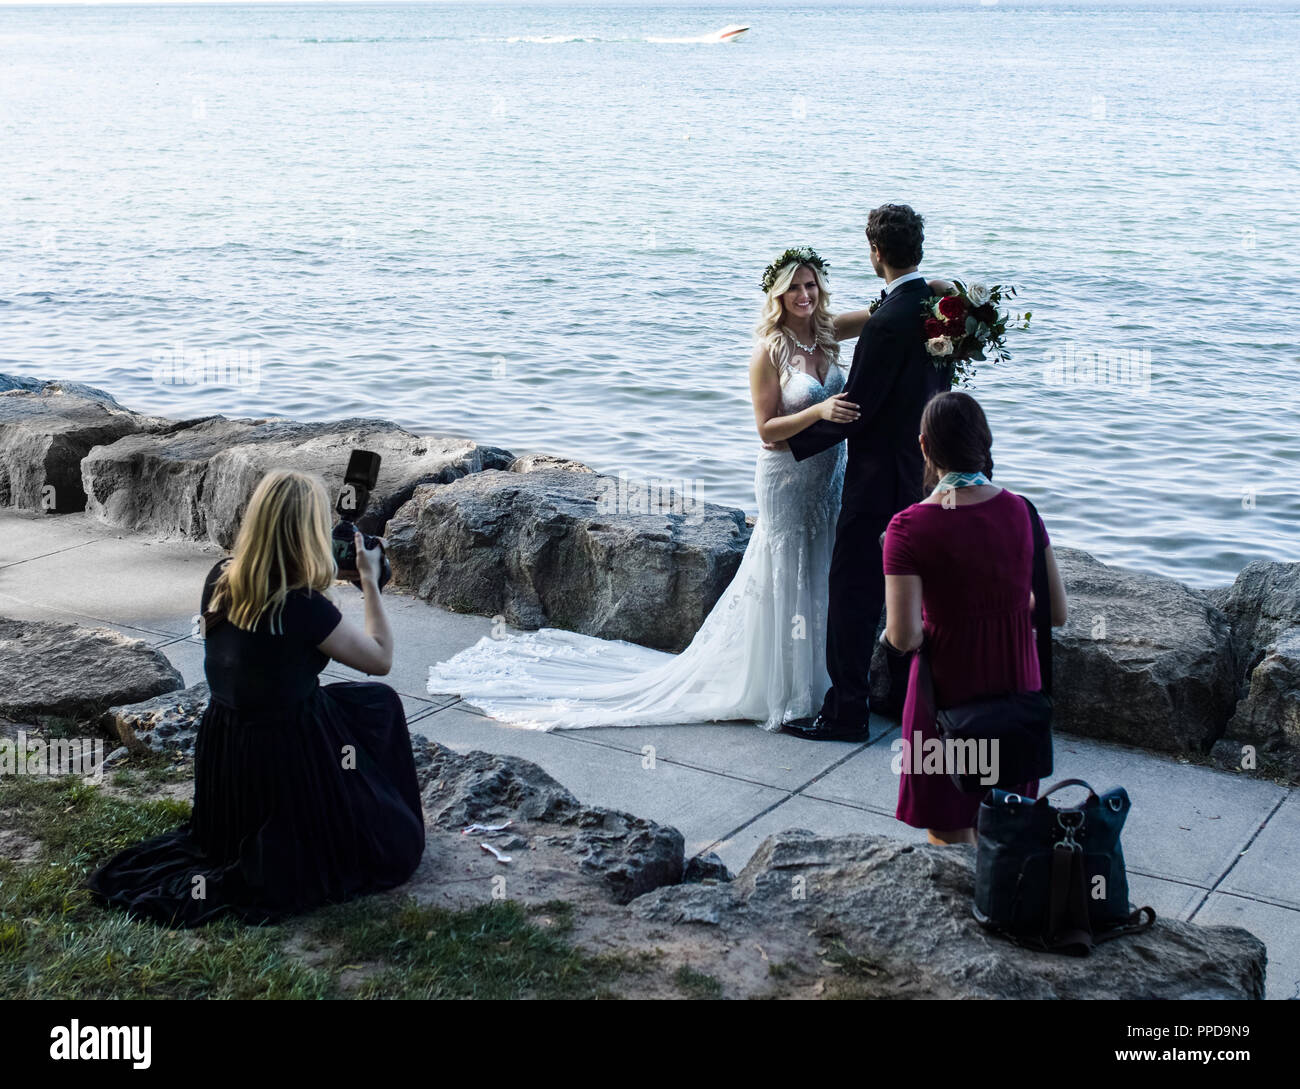 A couple is getting married at Niagara On The Lake, a photographer and her assistant are also present. Stock Photo